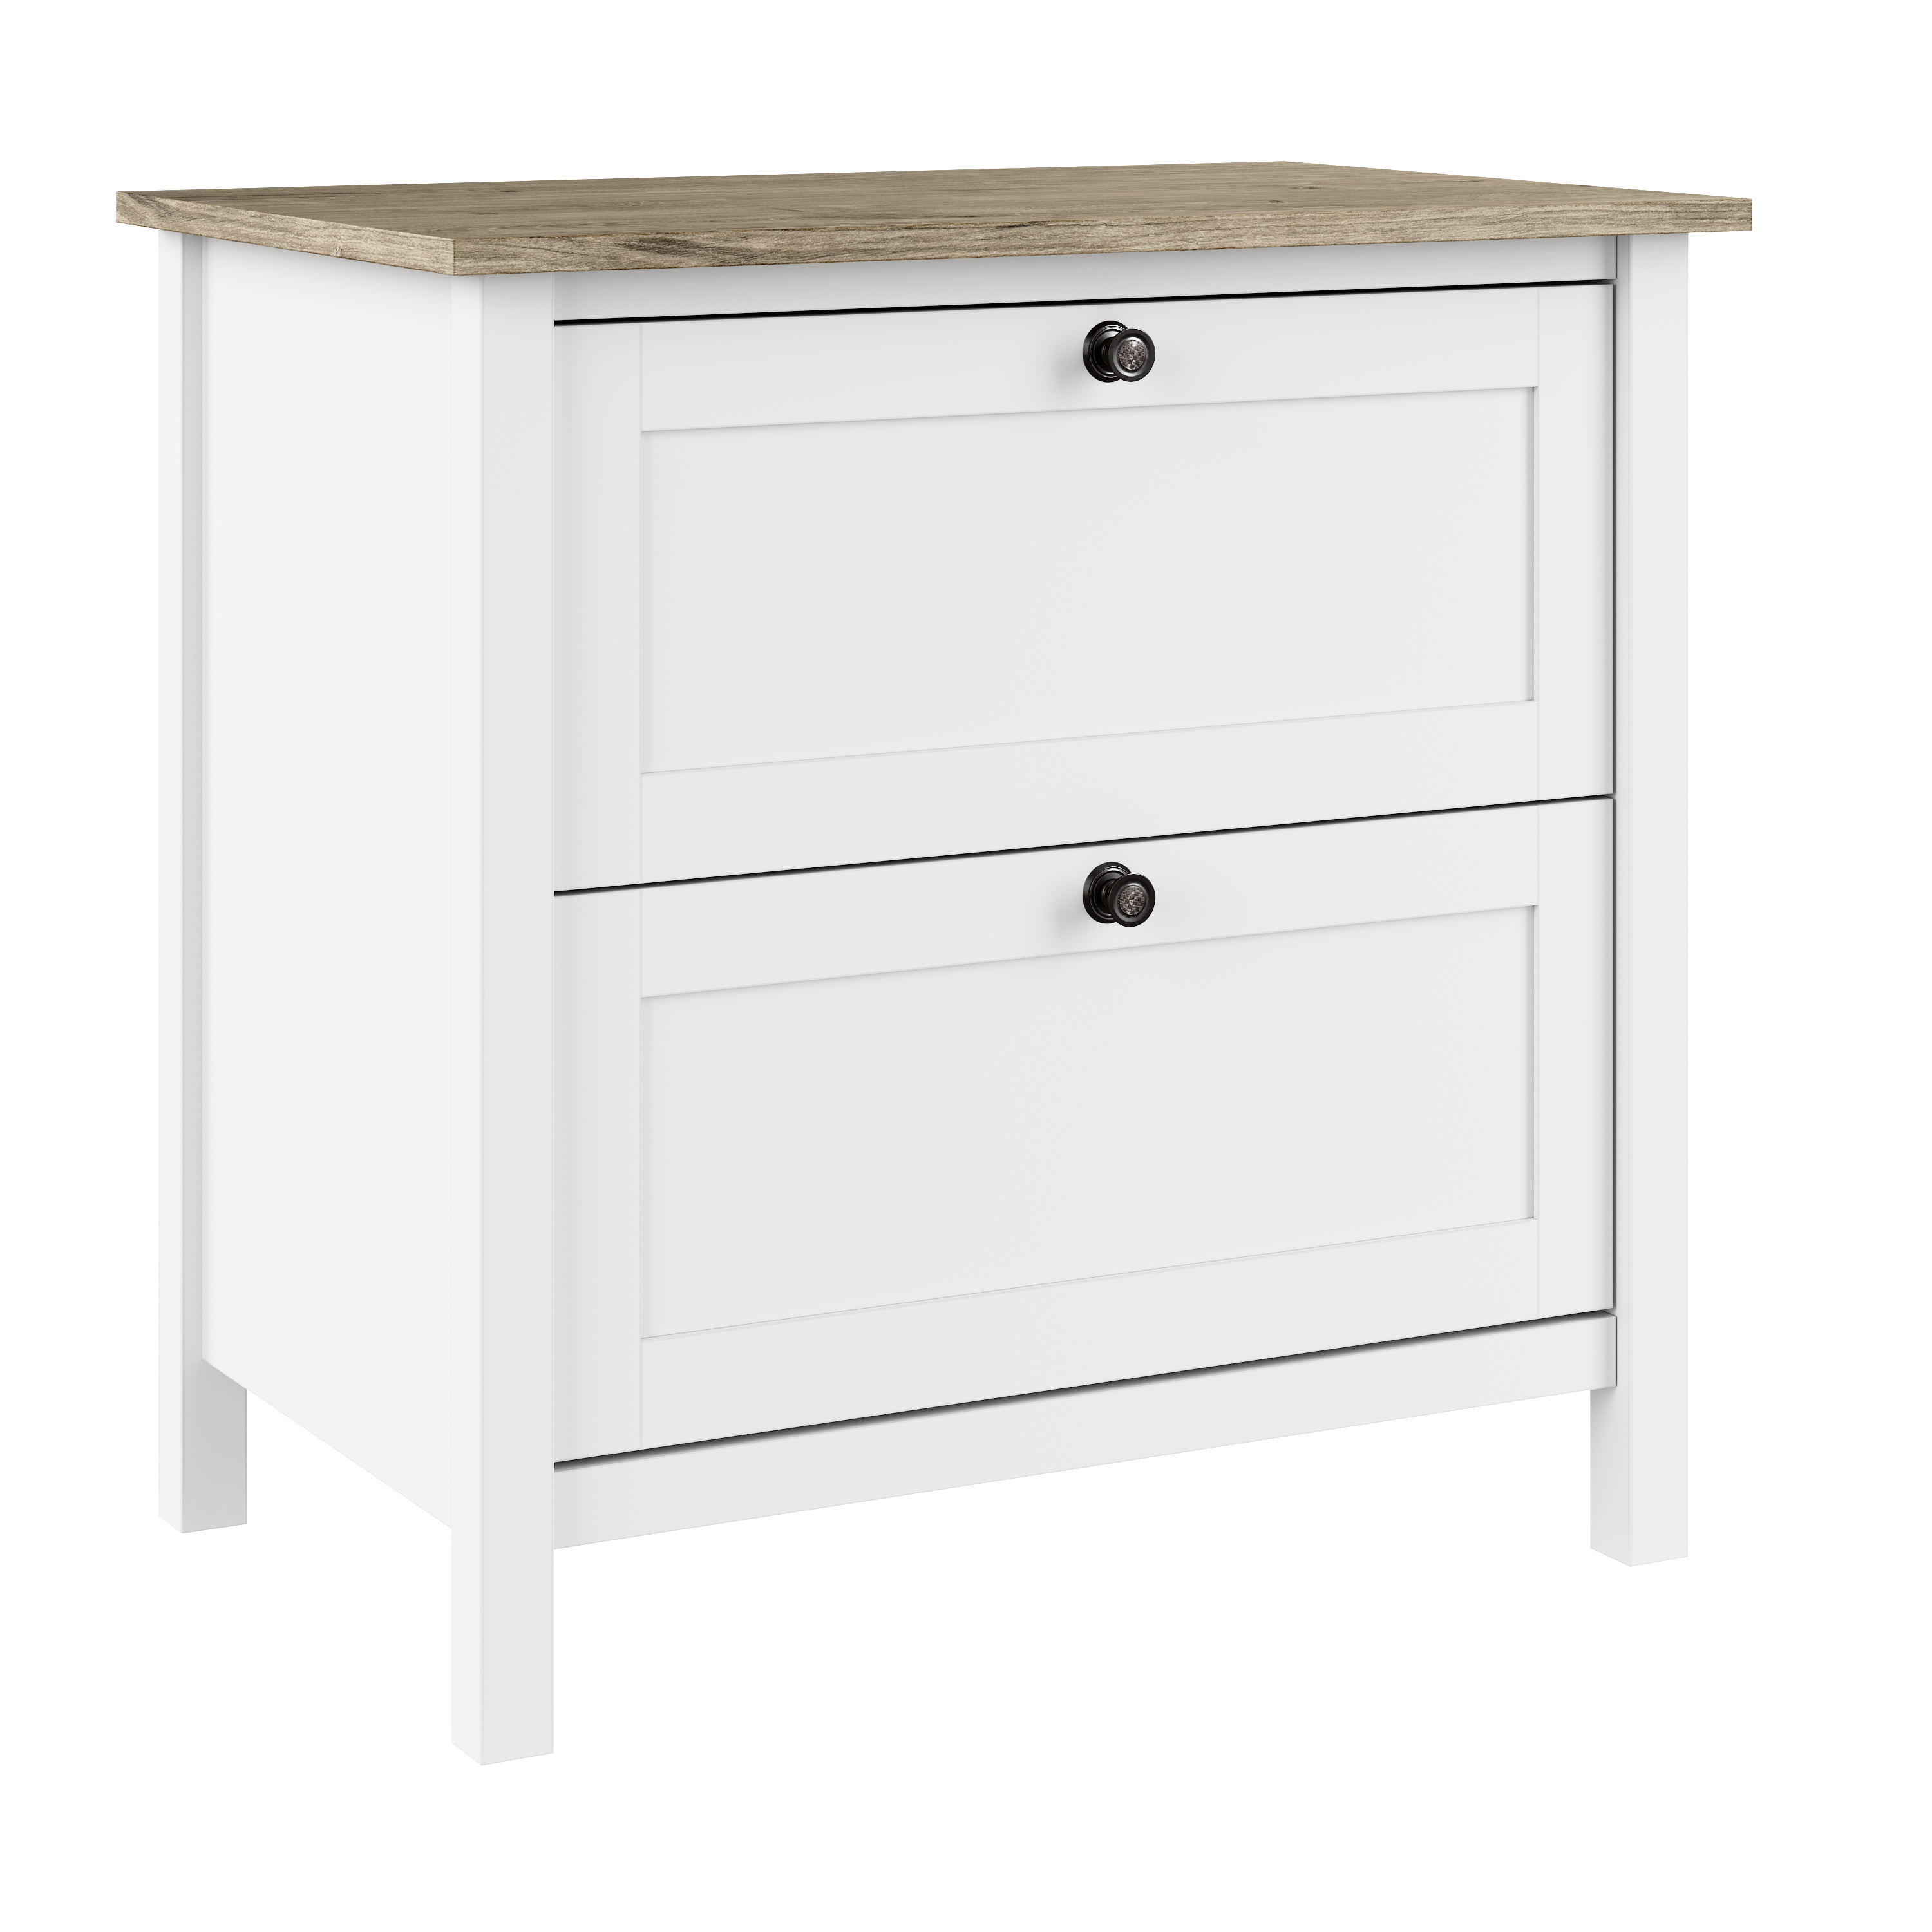 Shop Bush Furniture Mayfield 2 Drawer Lateral File Cabinet 02 MAF131GW2-03 #color_shiplap gray/pure white